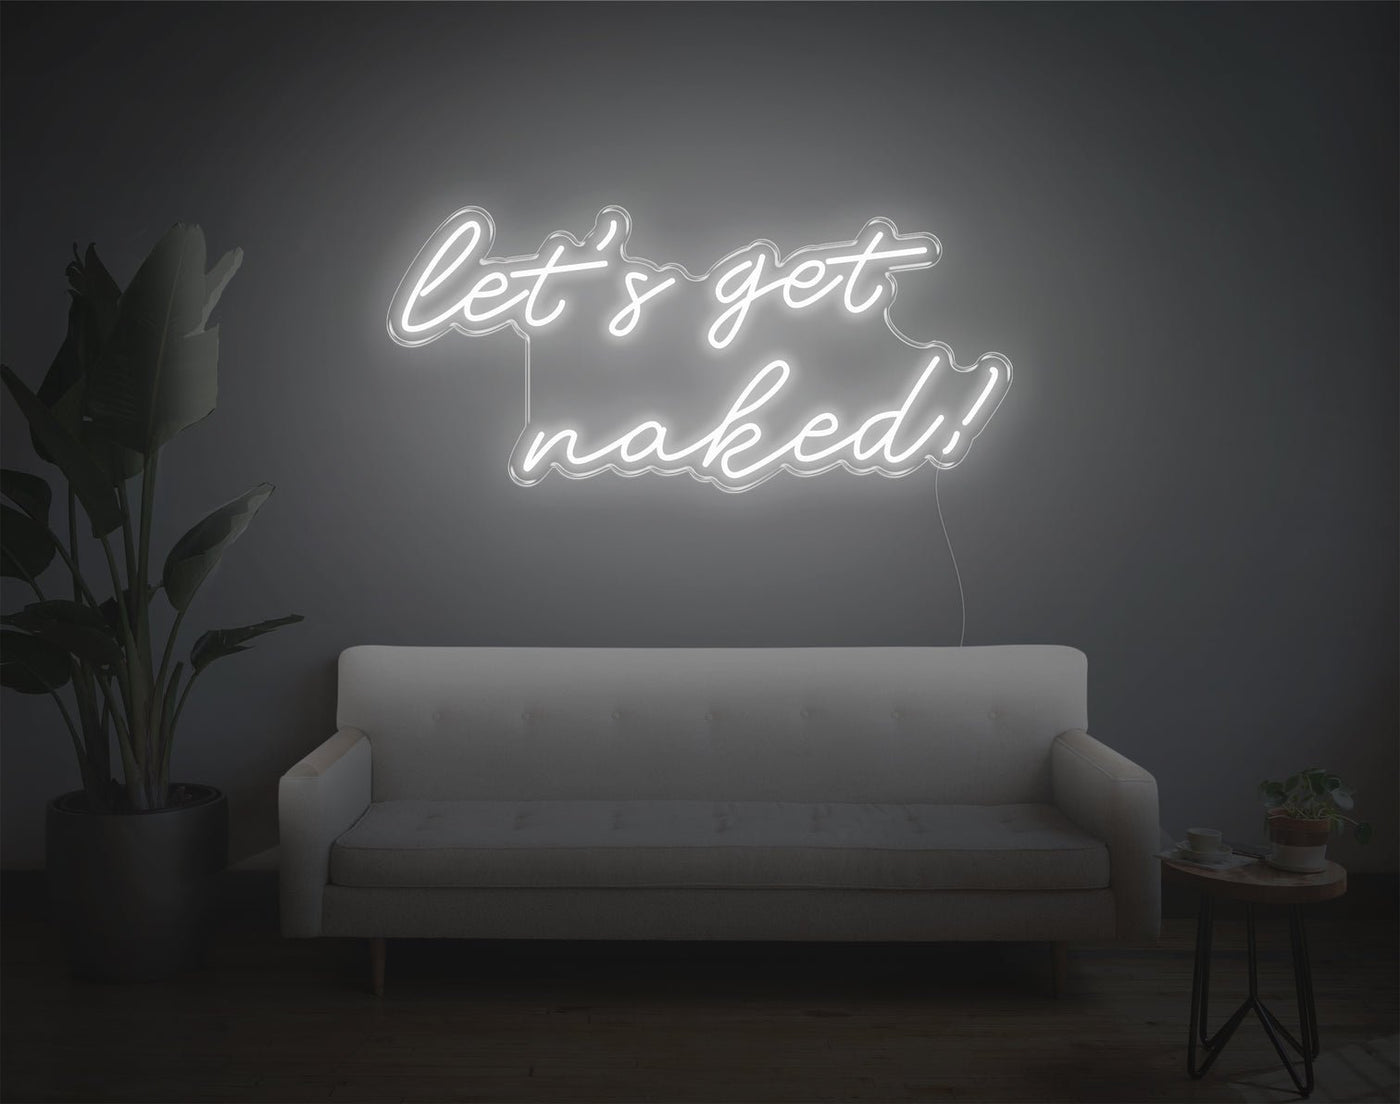 Let's Get Naked! LED Neon Sign - 14inch x 32inchWhite